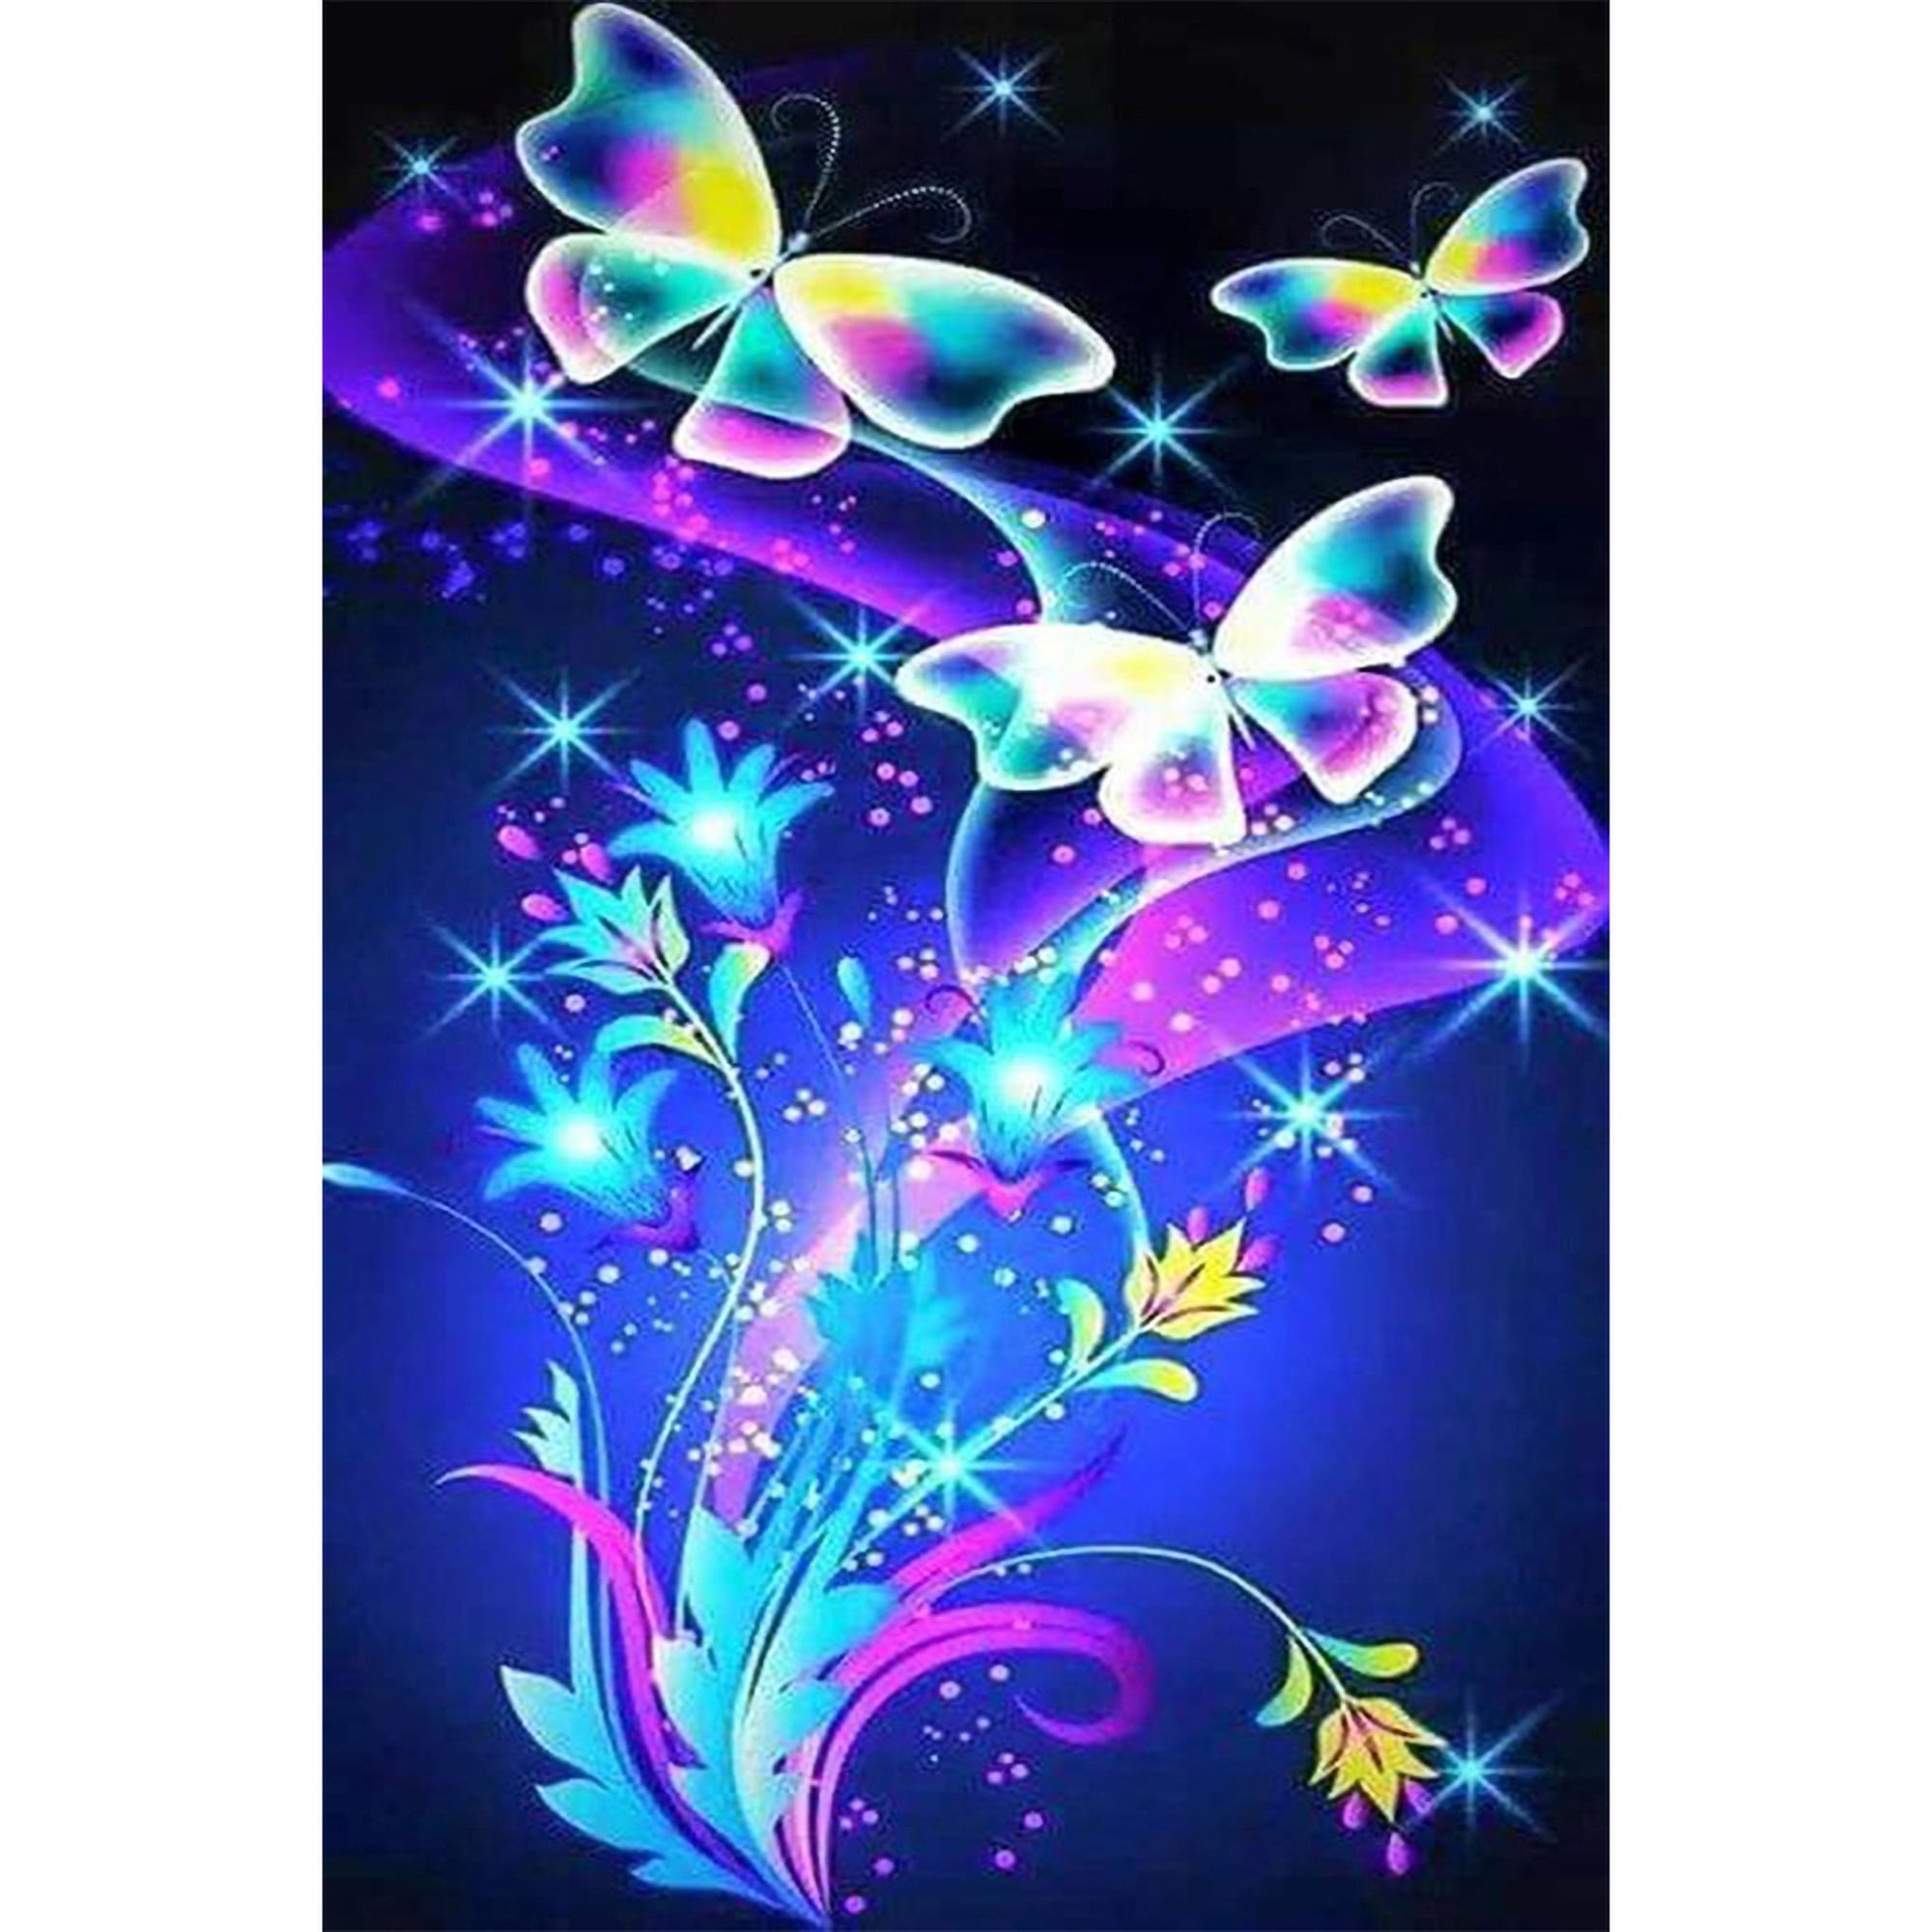 5D Diamond Painting Butterfly Full Drill Handwork Embroidery Cross Stitch Kits